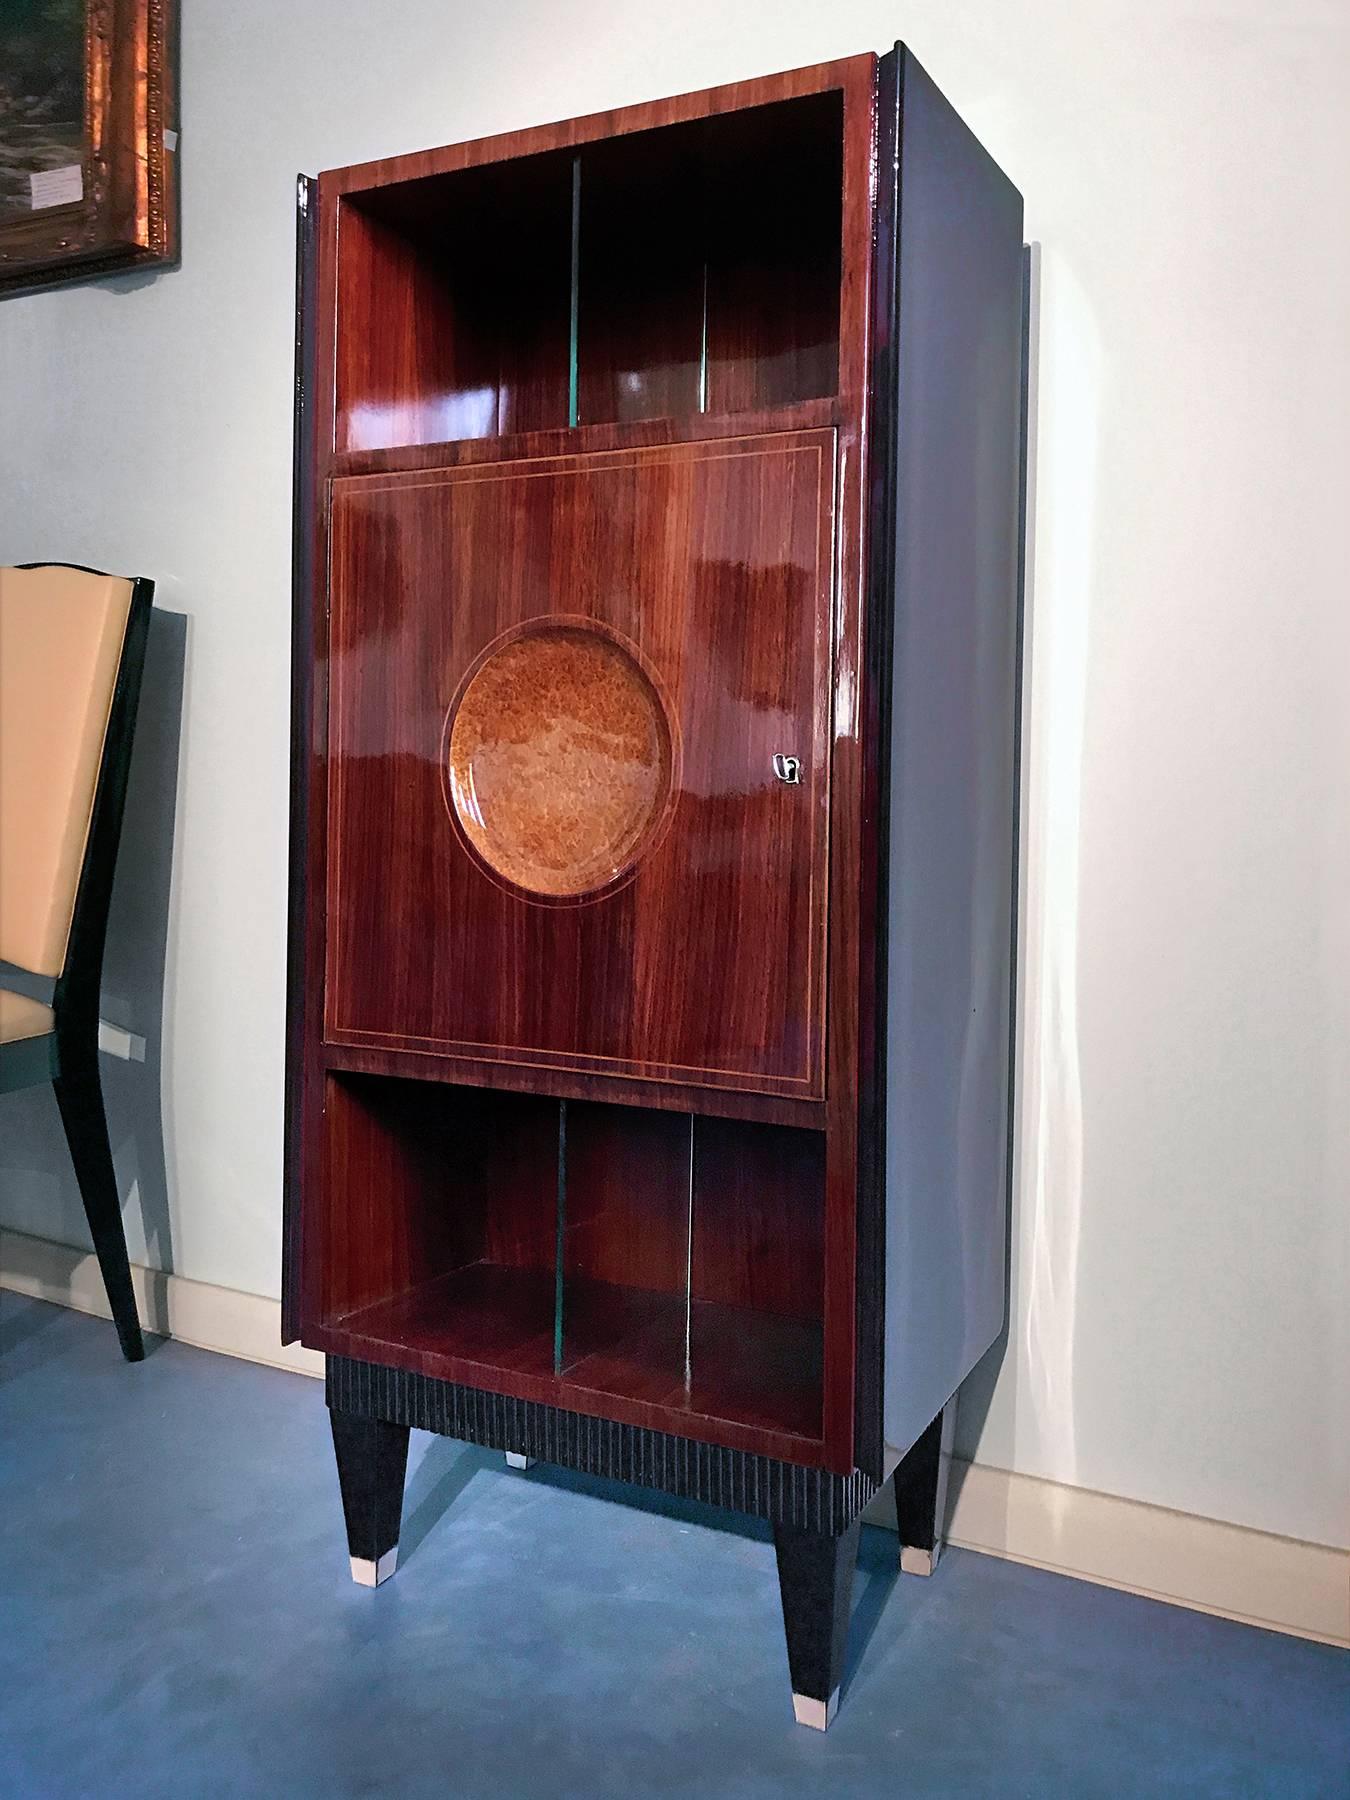 This so amazing cabinet with Secretaire of the 1950s is attributable to the design of Paolo Buffa.
The external structure is refinished with glass dividers and parchment feet.
Its aesthetic uniqueness is given by the central door decorated with a